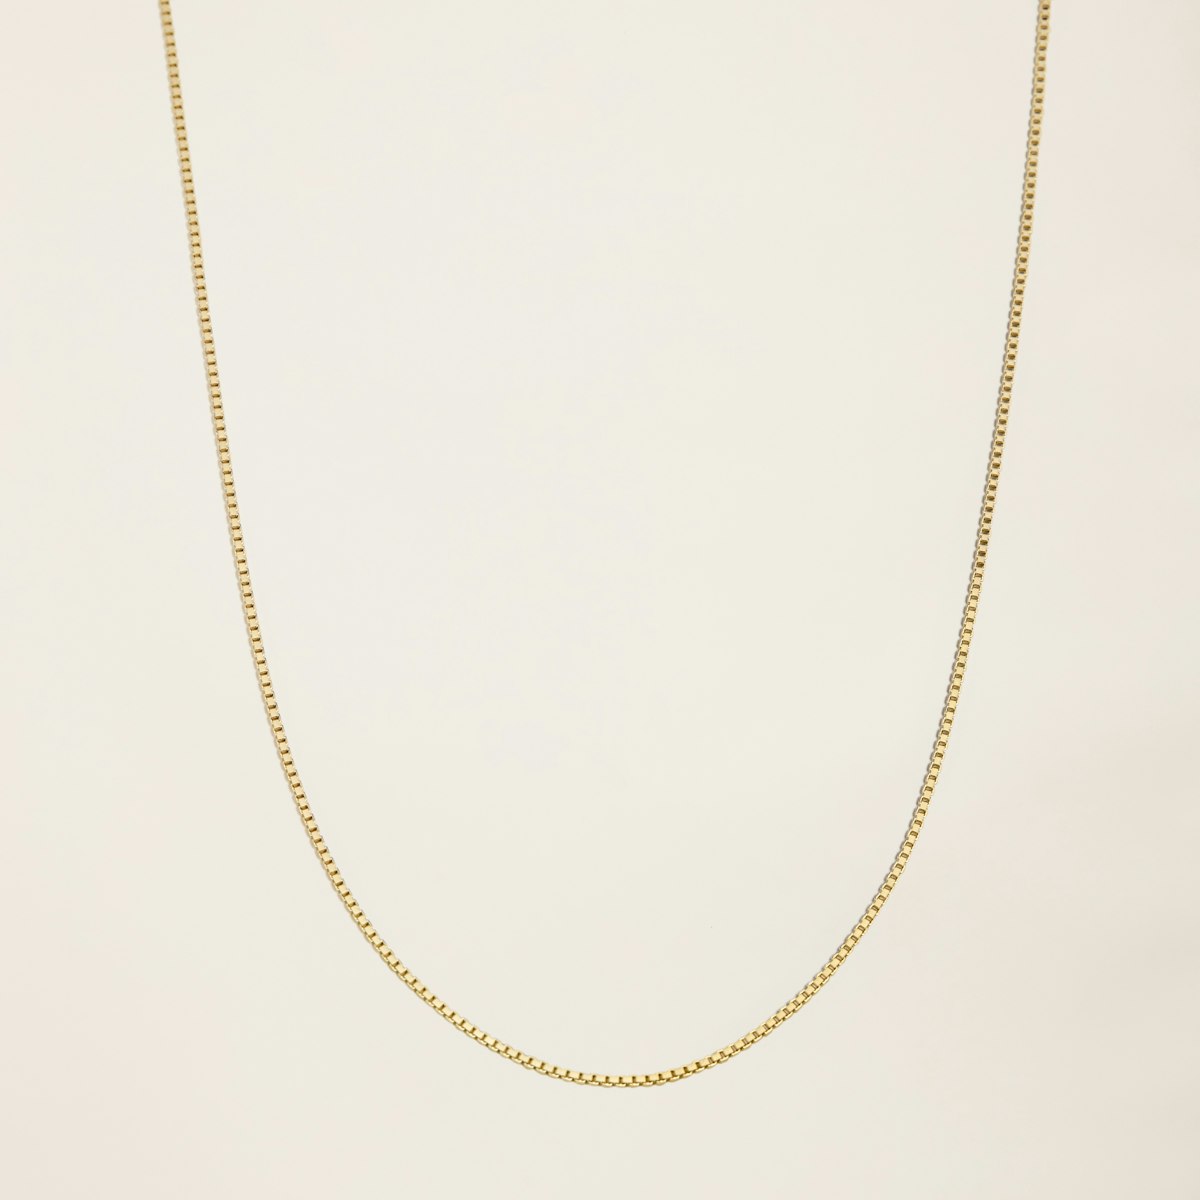 14K Gold Box Chain Necklace - 16__A_6235_Edited_Edited.jpg